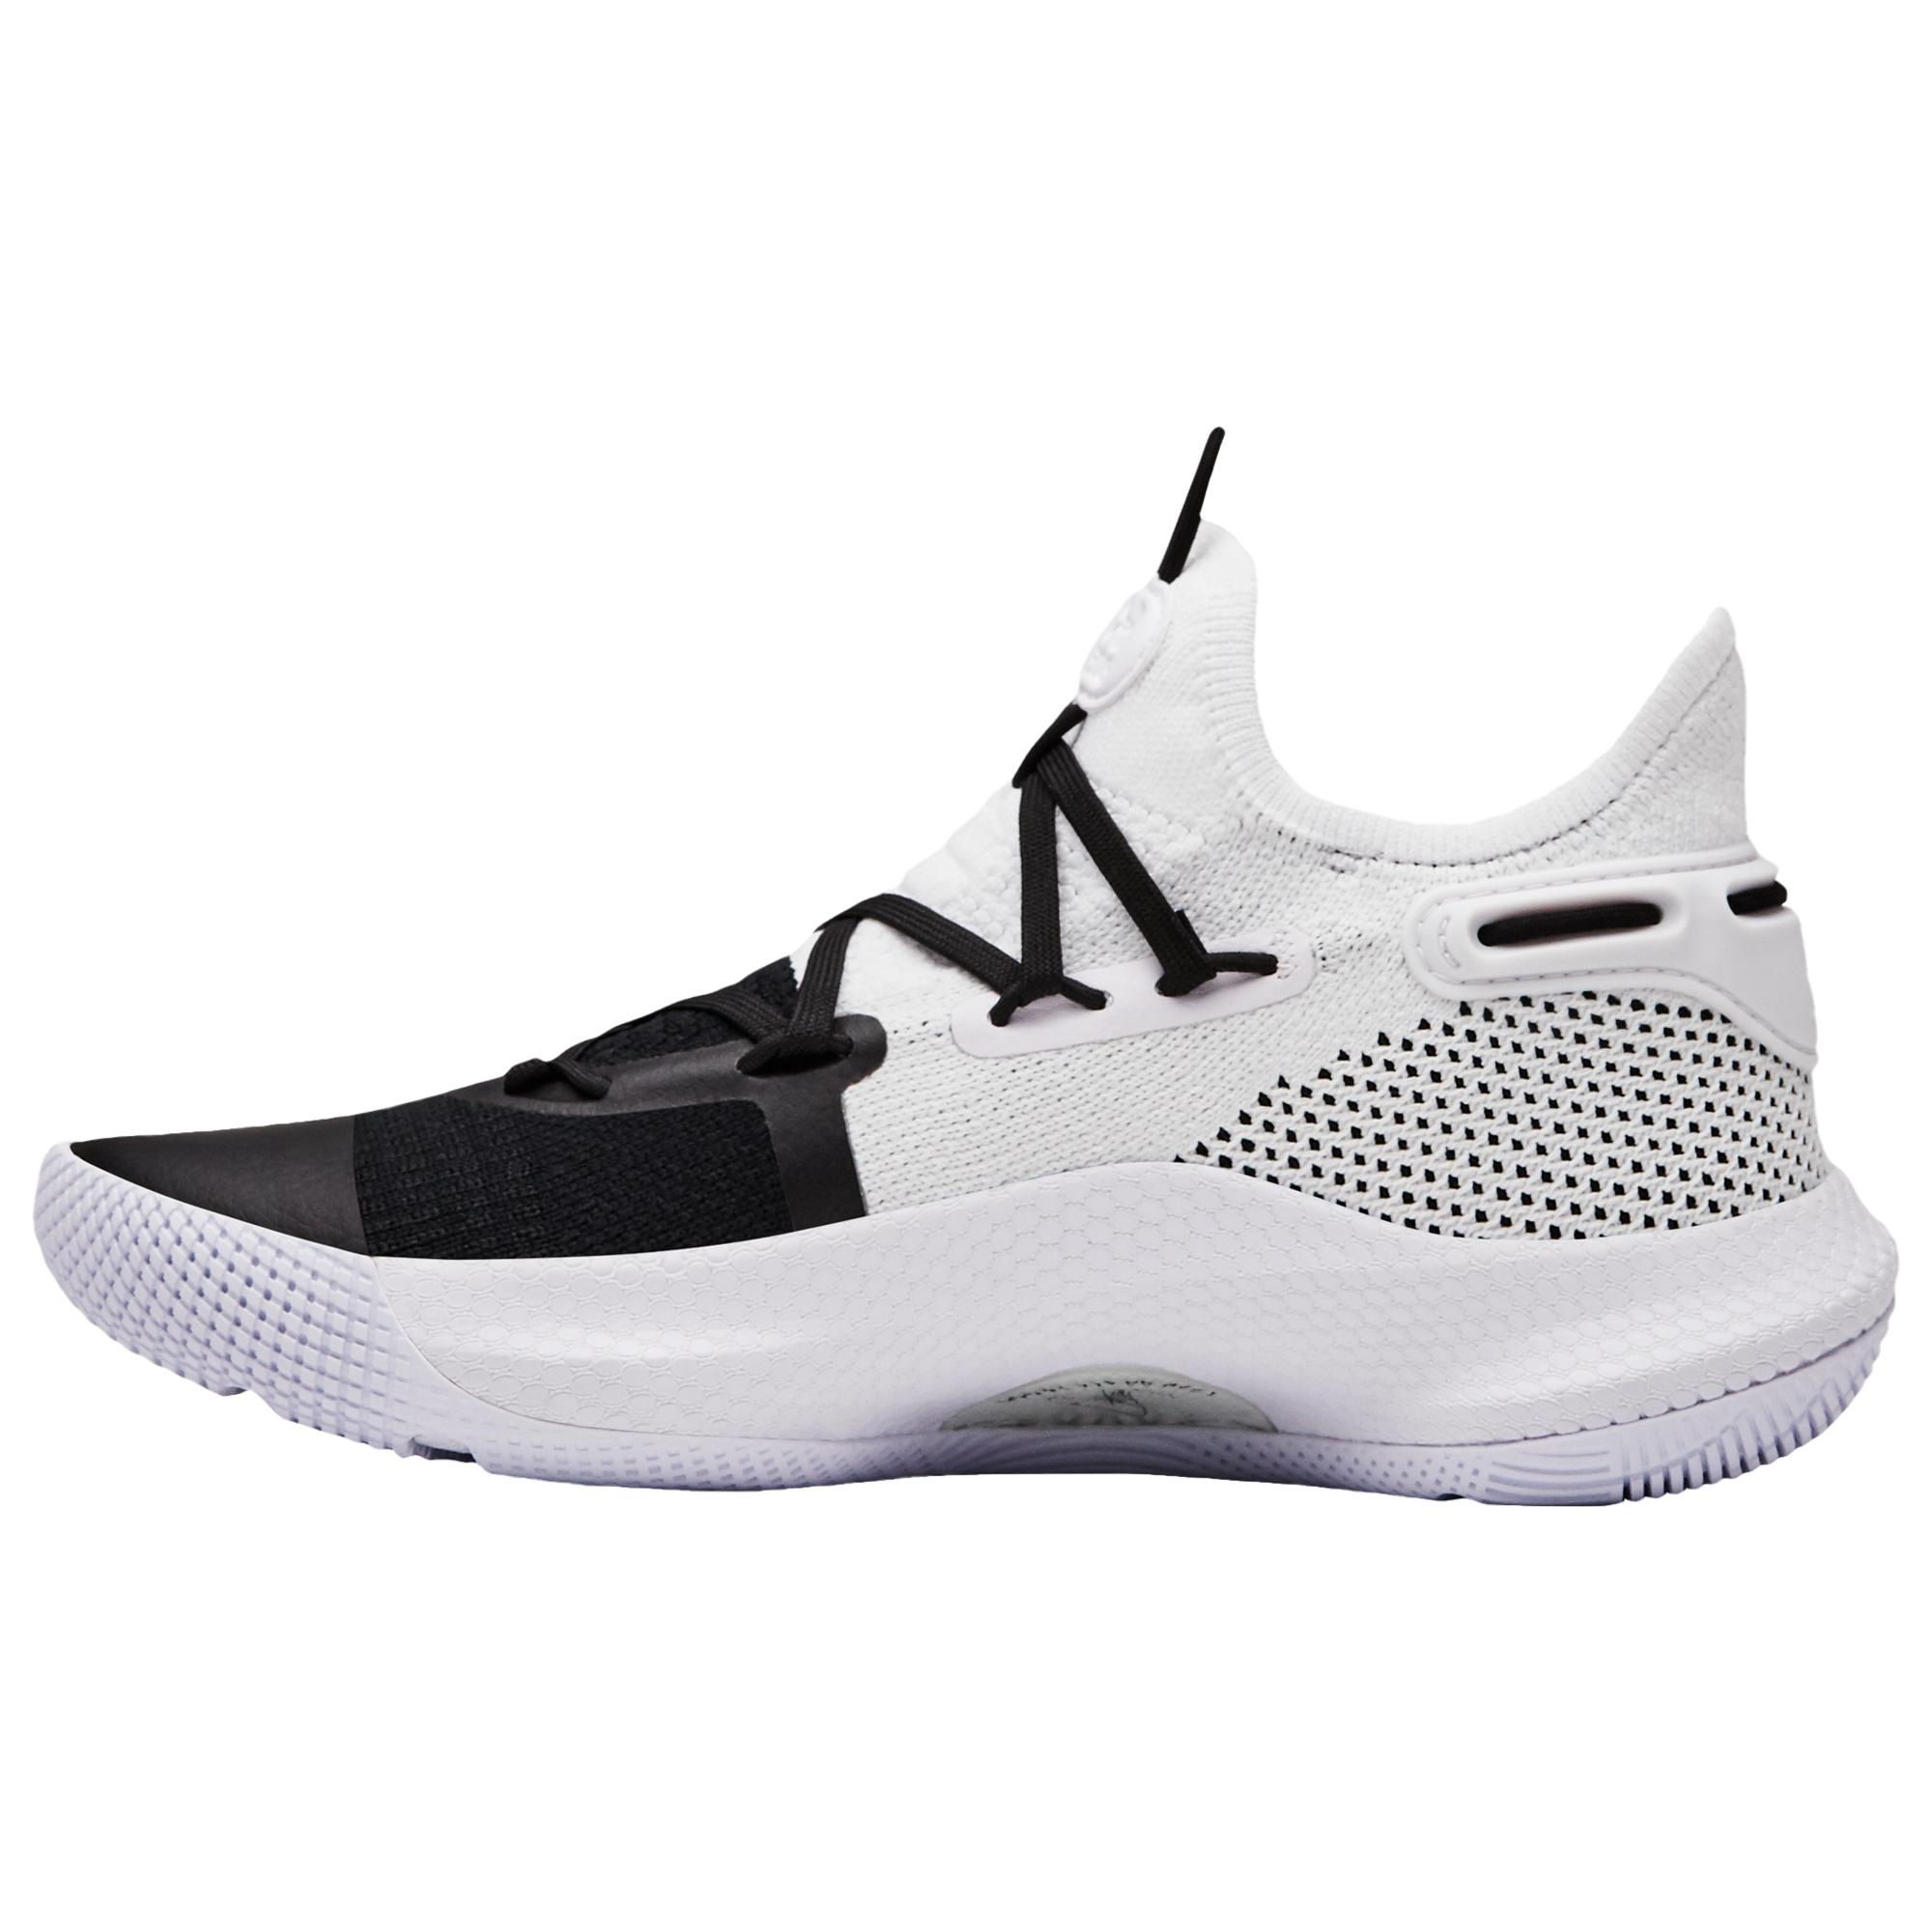 Under Armour Curry 6 Men's Basketball Shoe Lifestyle Stephen Curry sneaker